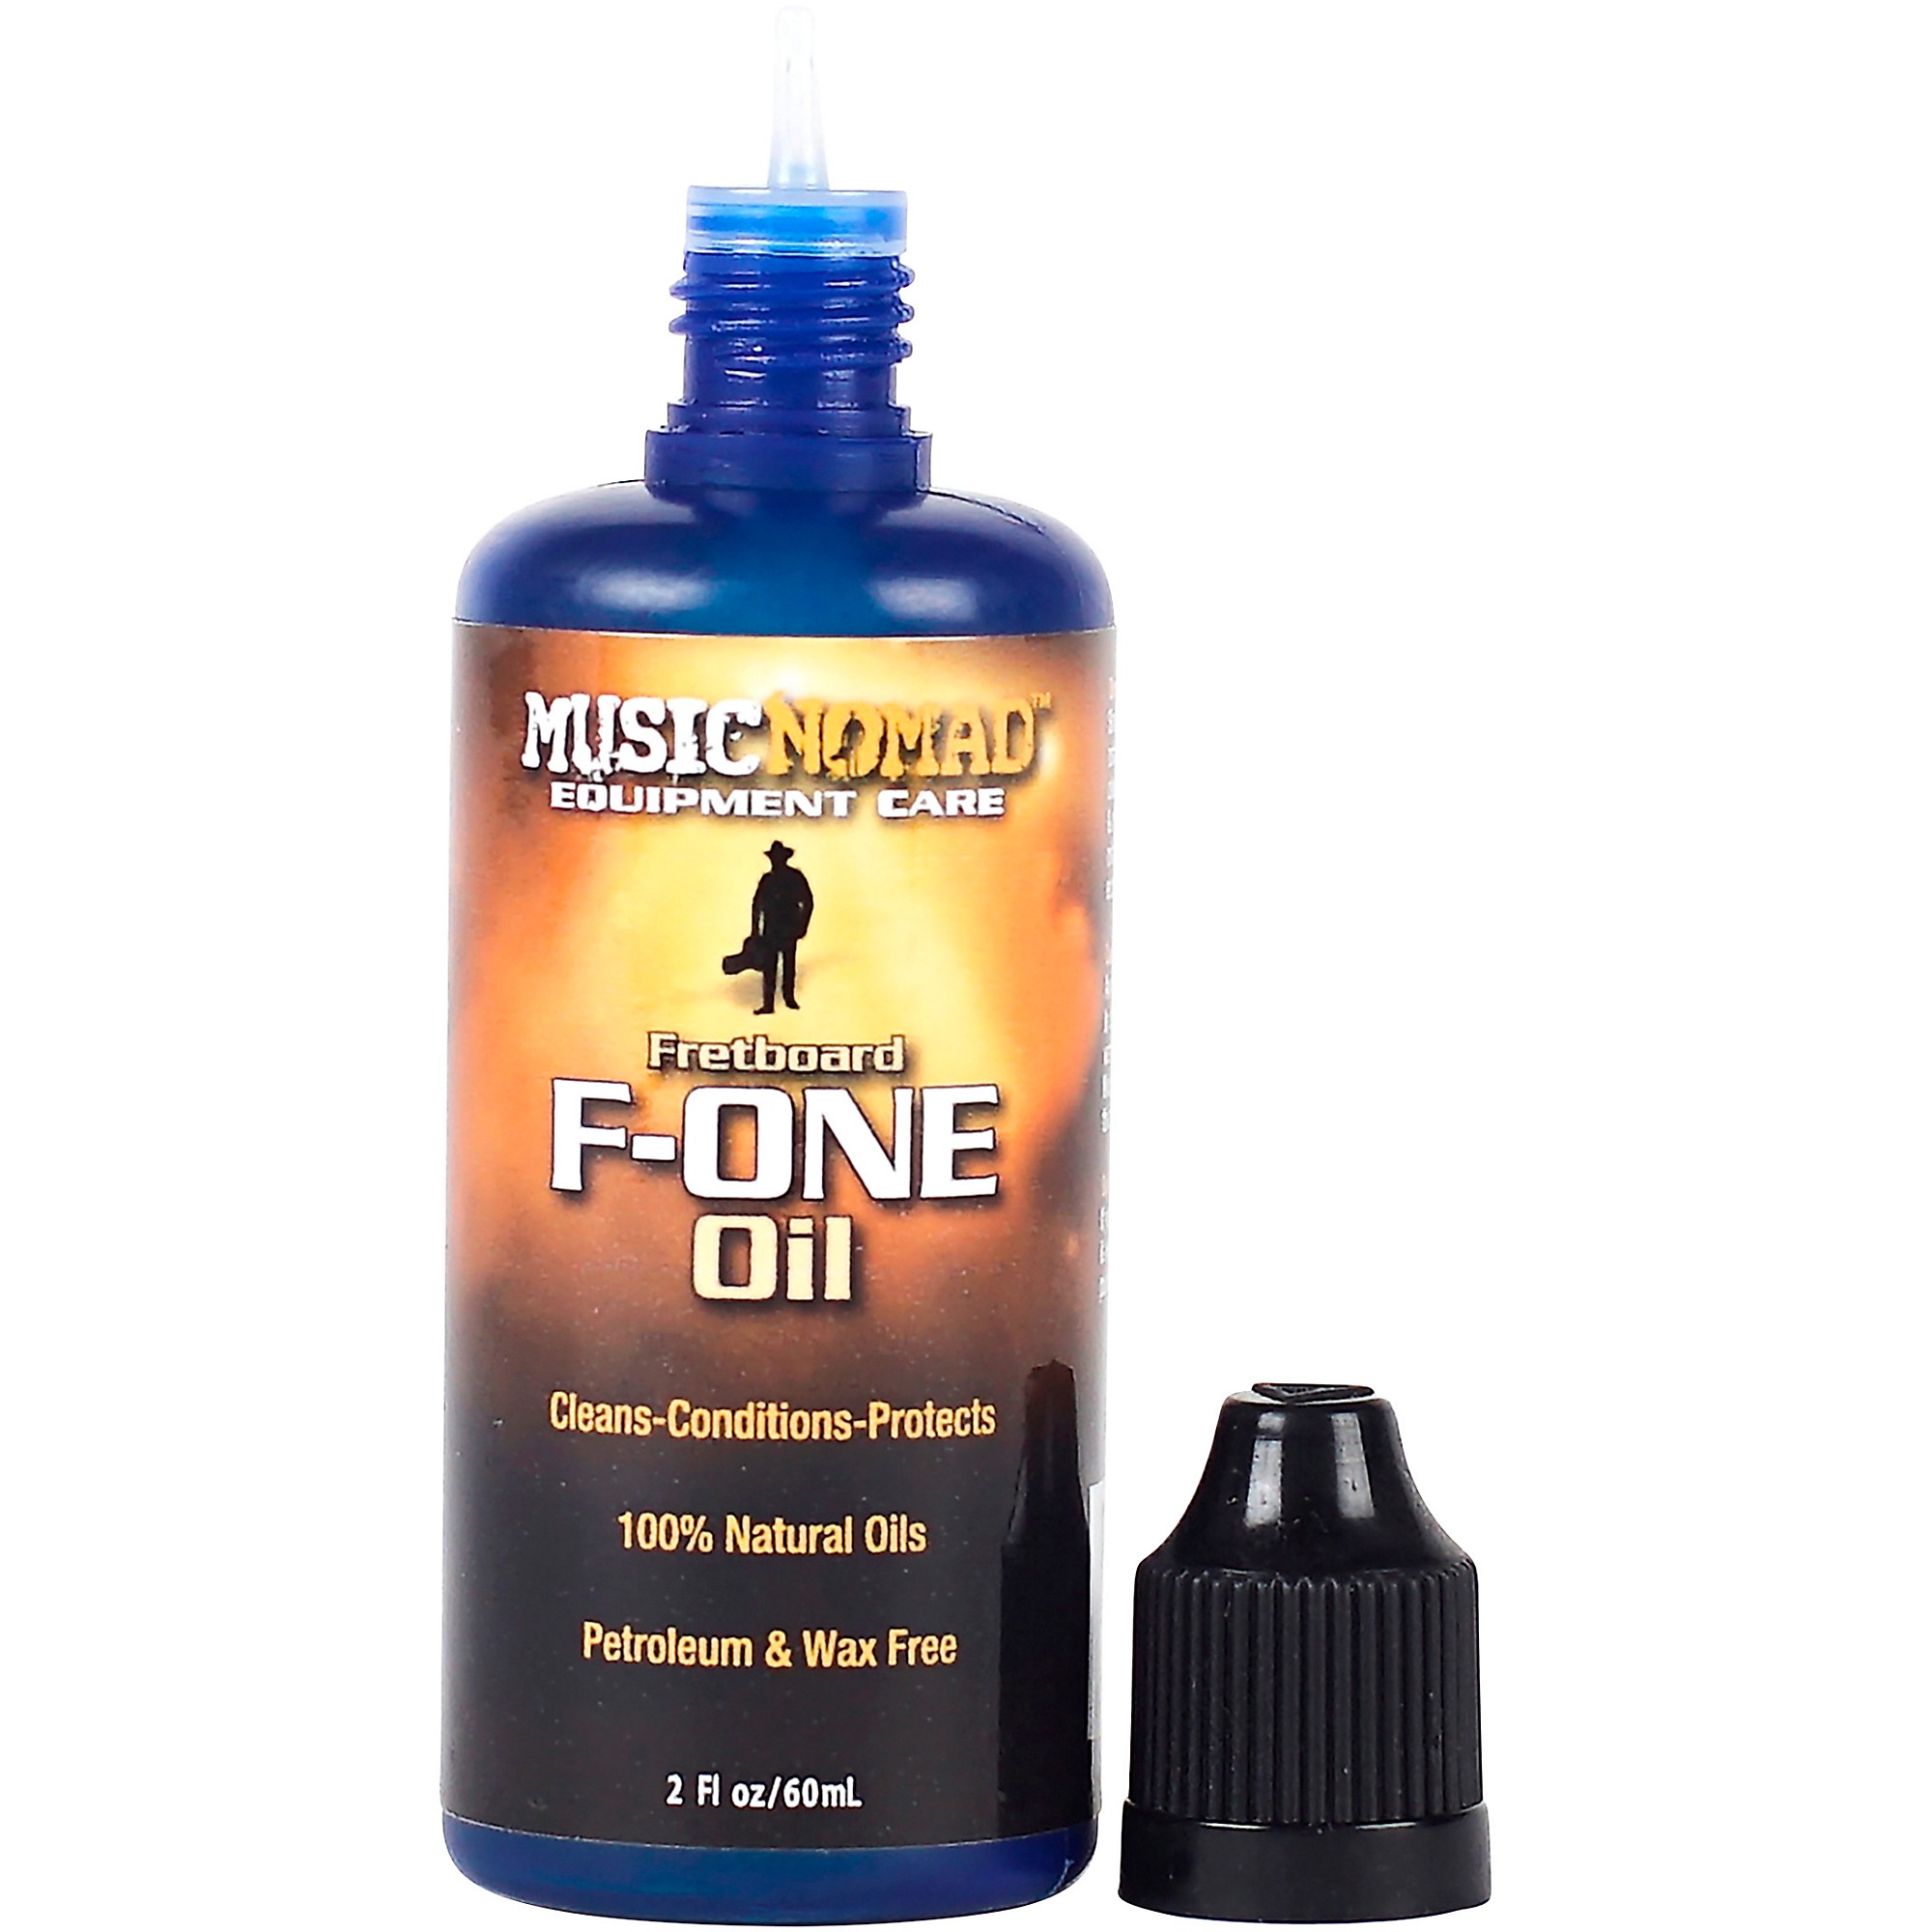 MusicNomad Fretboard F-One Oil review